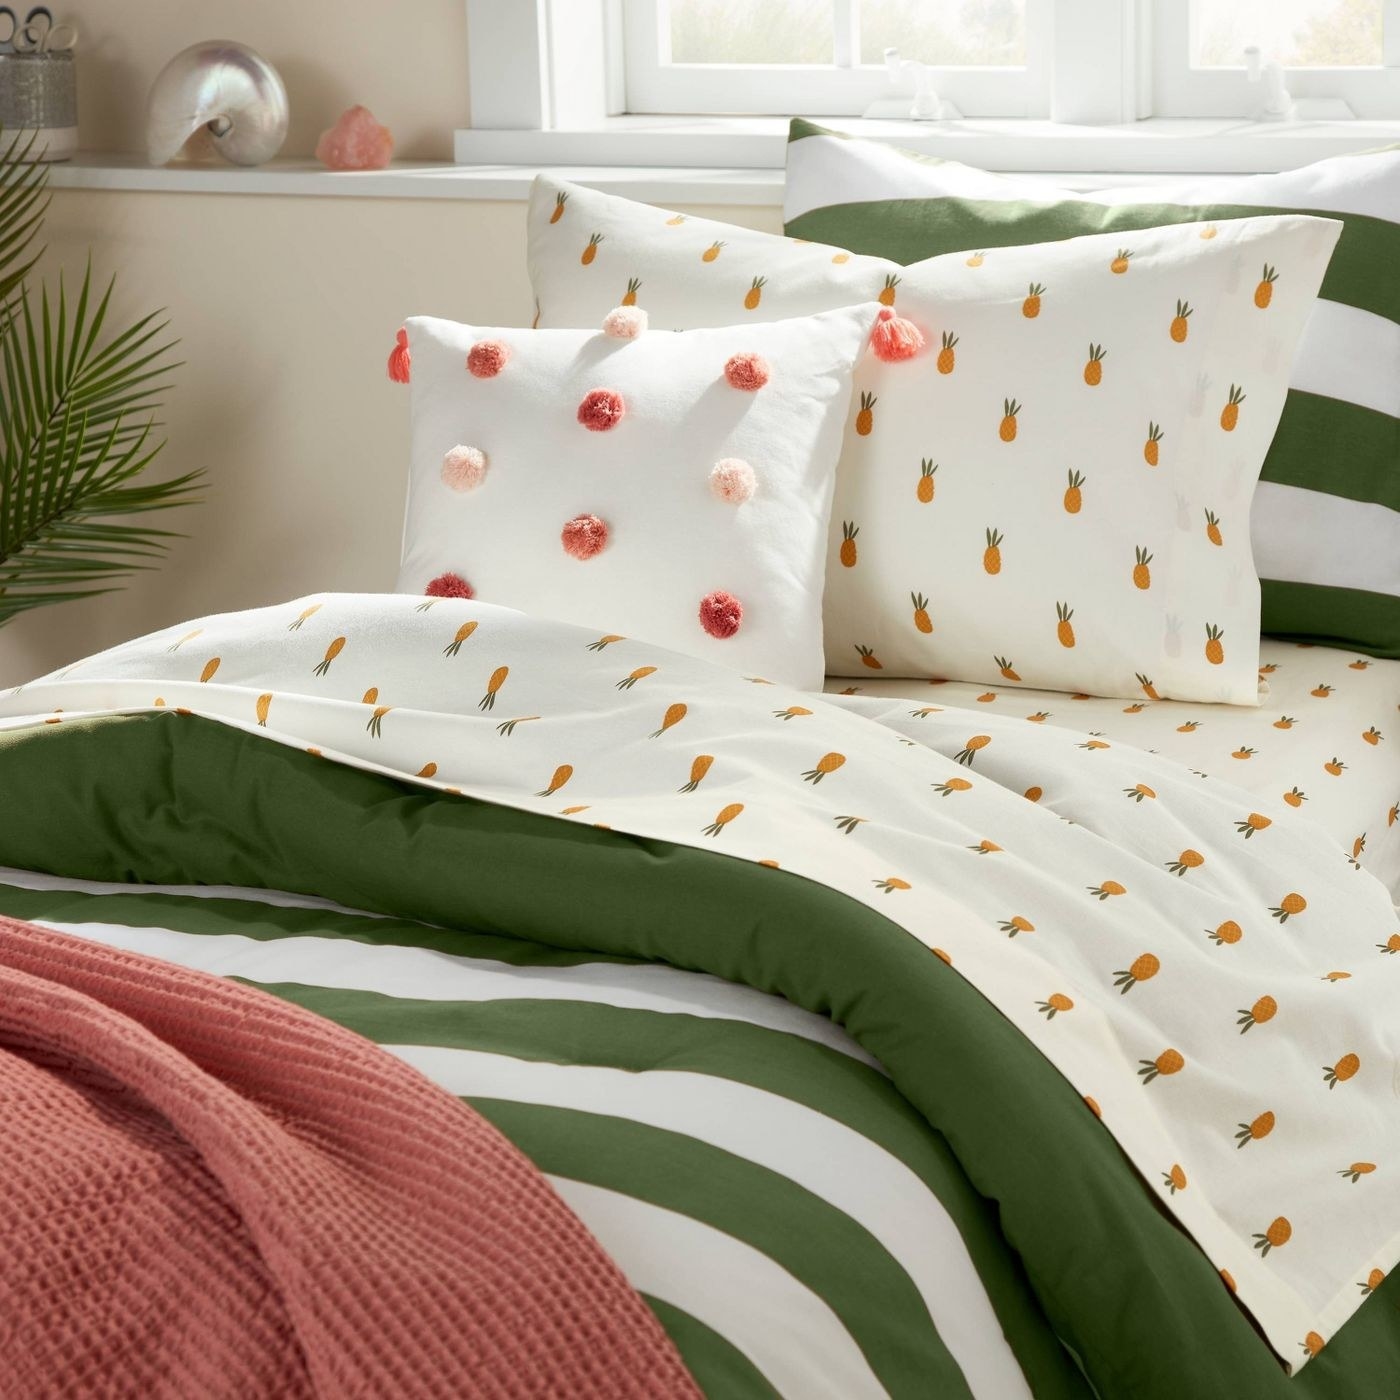 A bed with white sheets that have a pineapple design